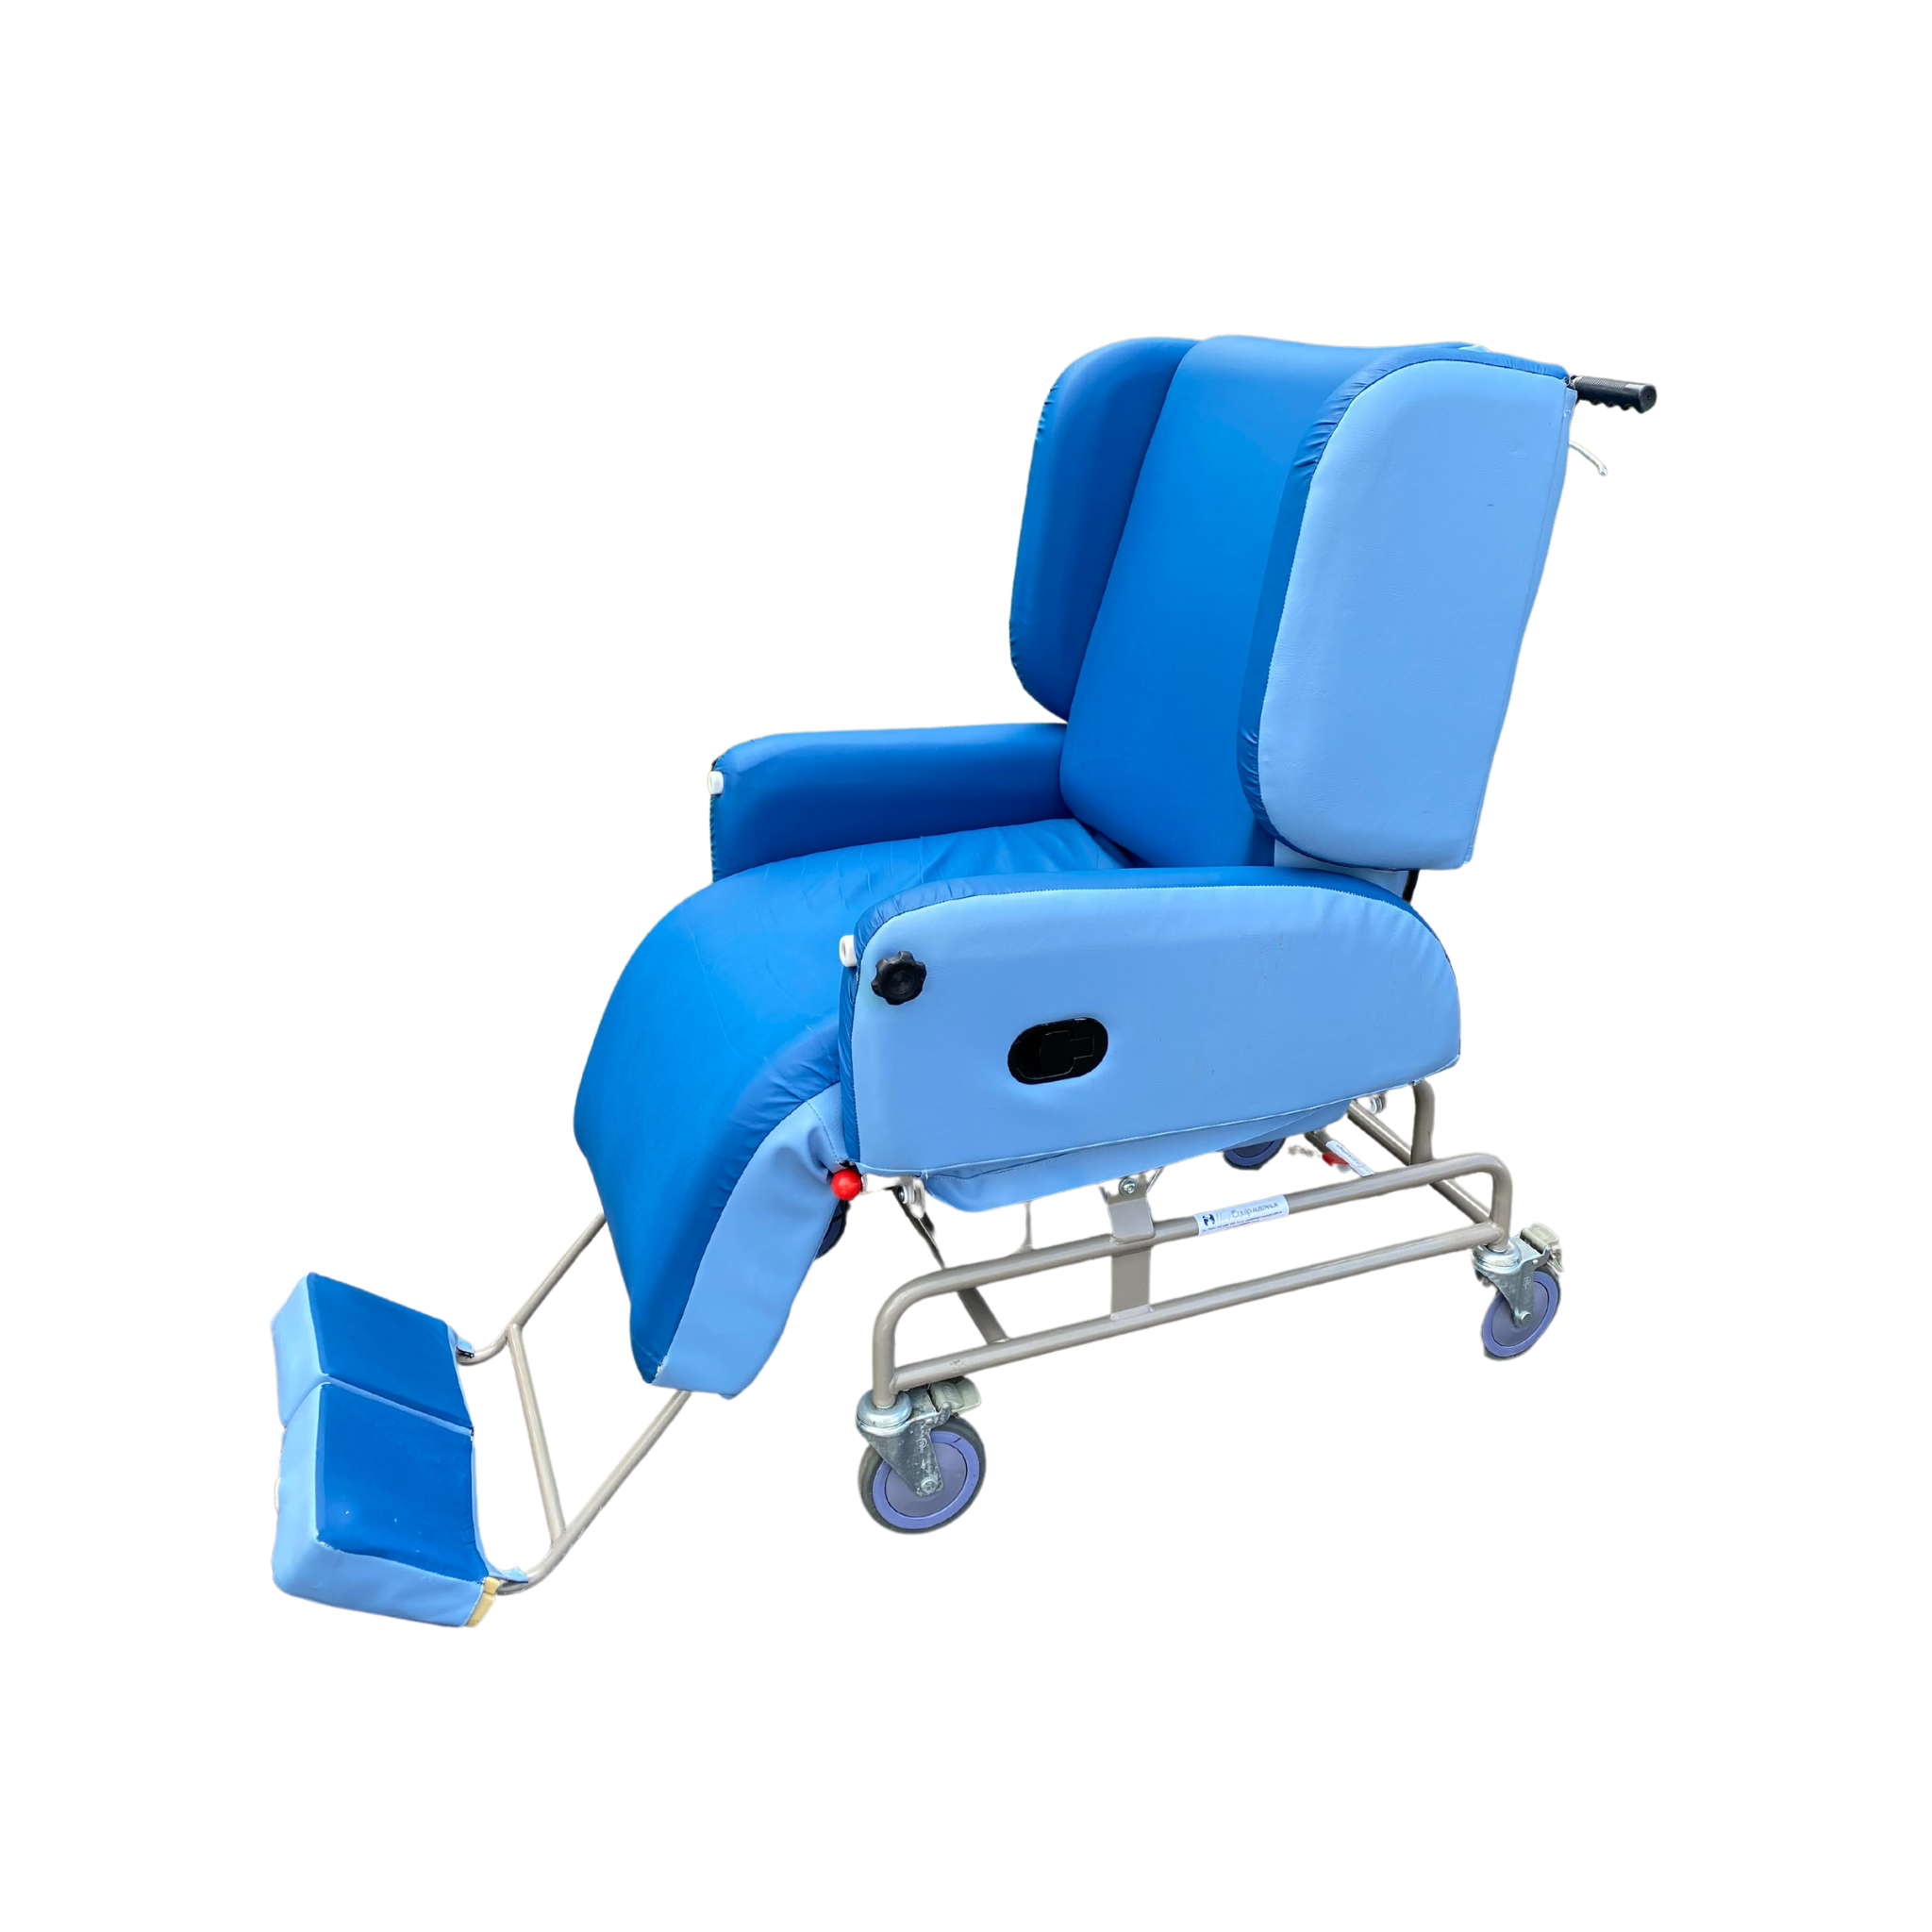 Rental - Classic Day Air Chair from Aged Care and Medical - Chair for Hire for Aged Care